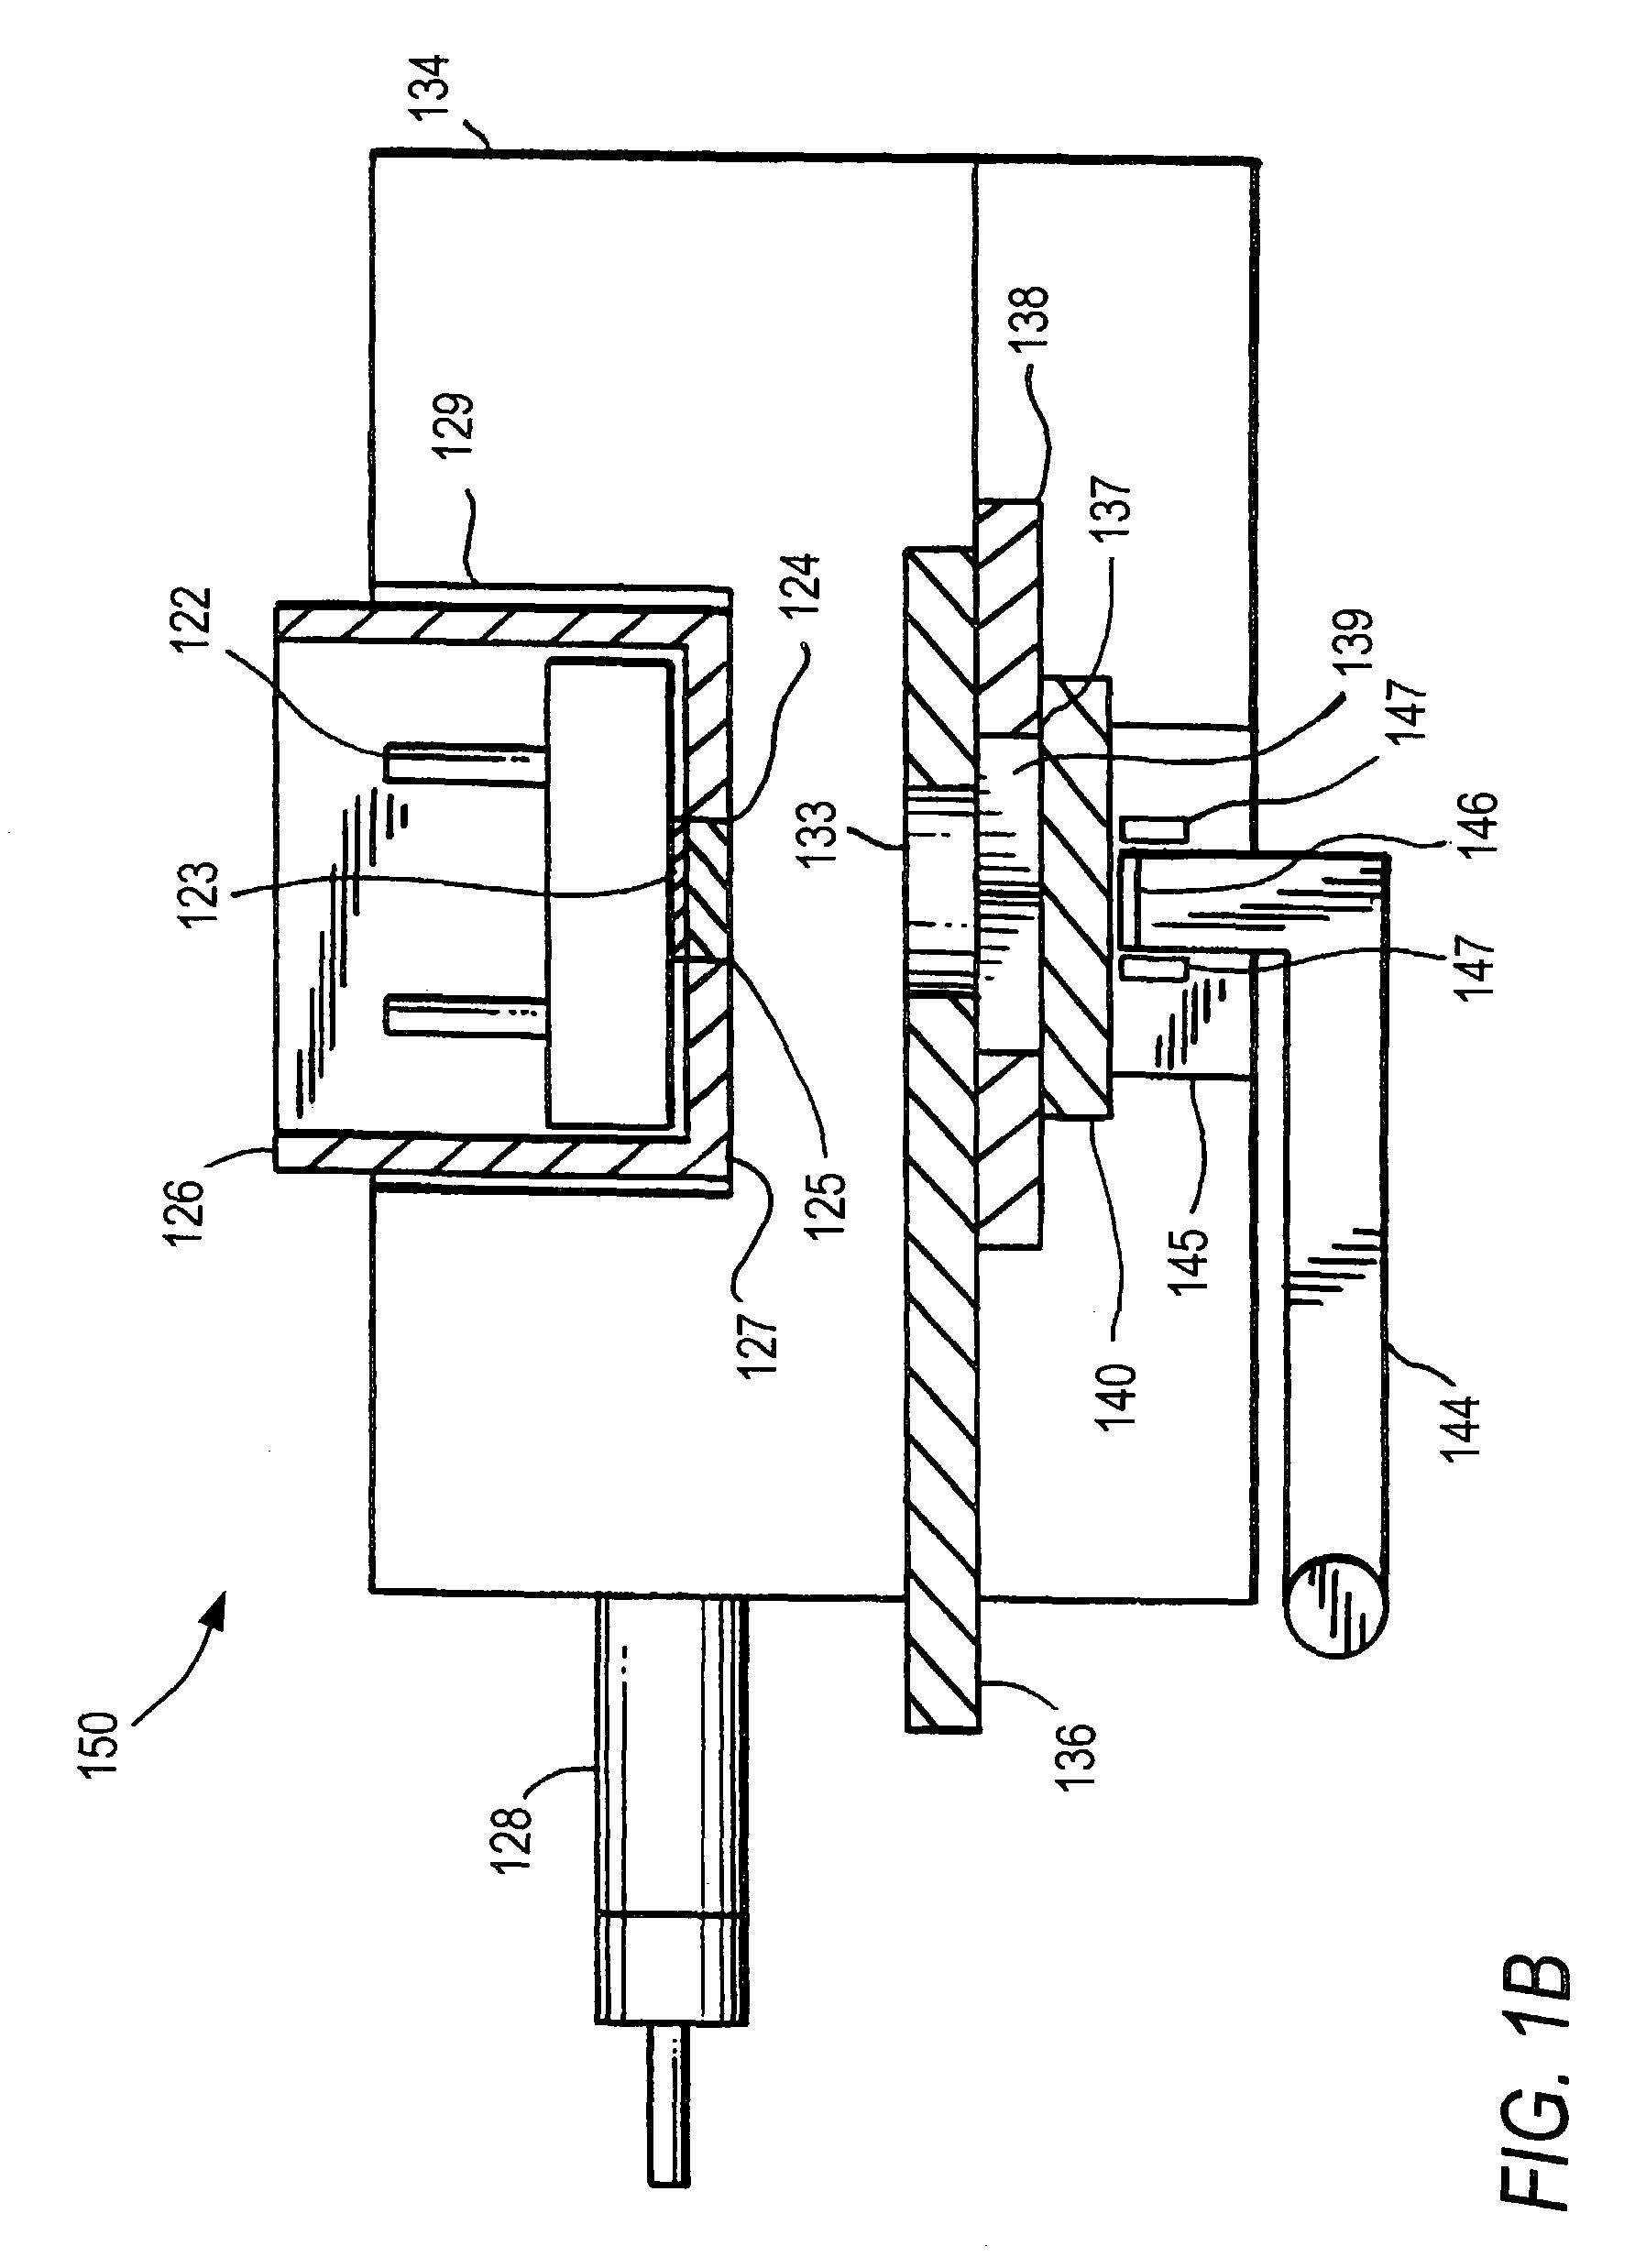 Electrochemiluminescence flow cell and flow cell components